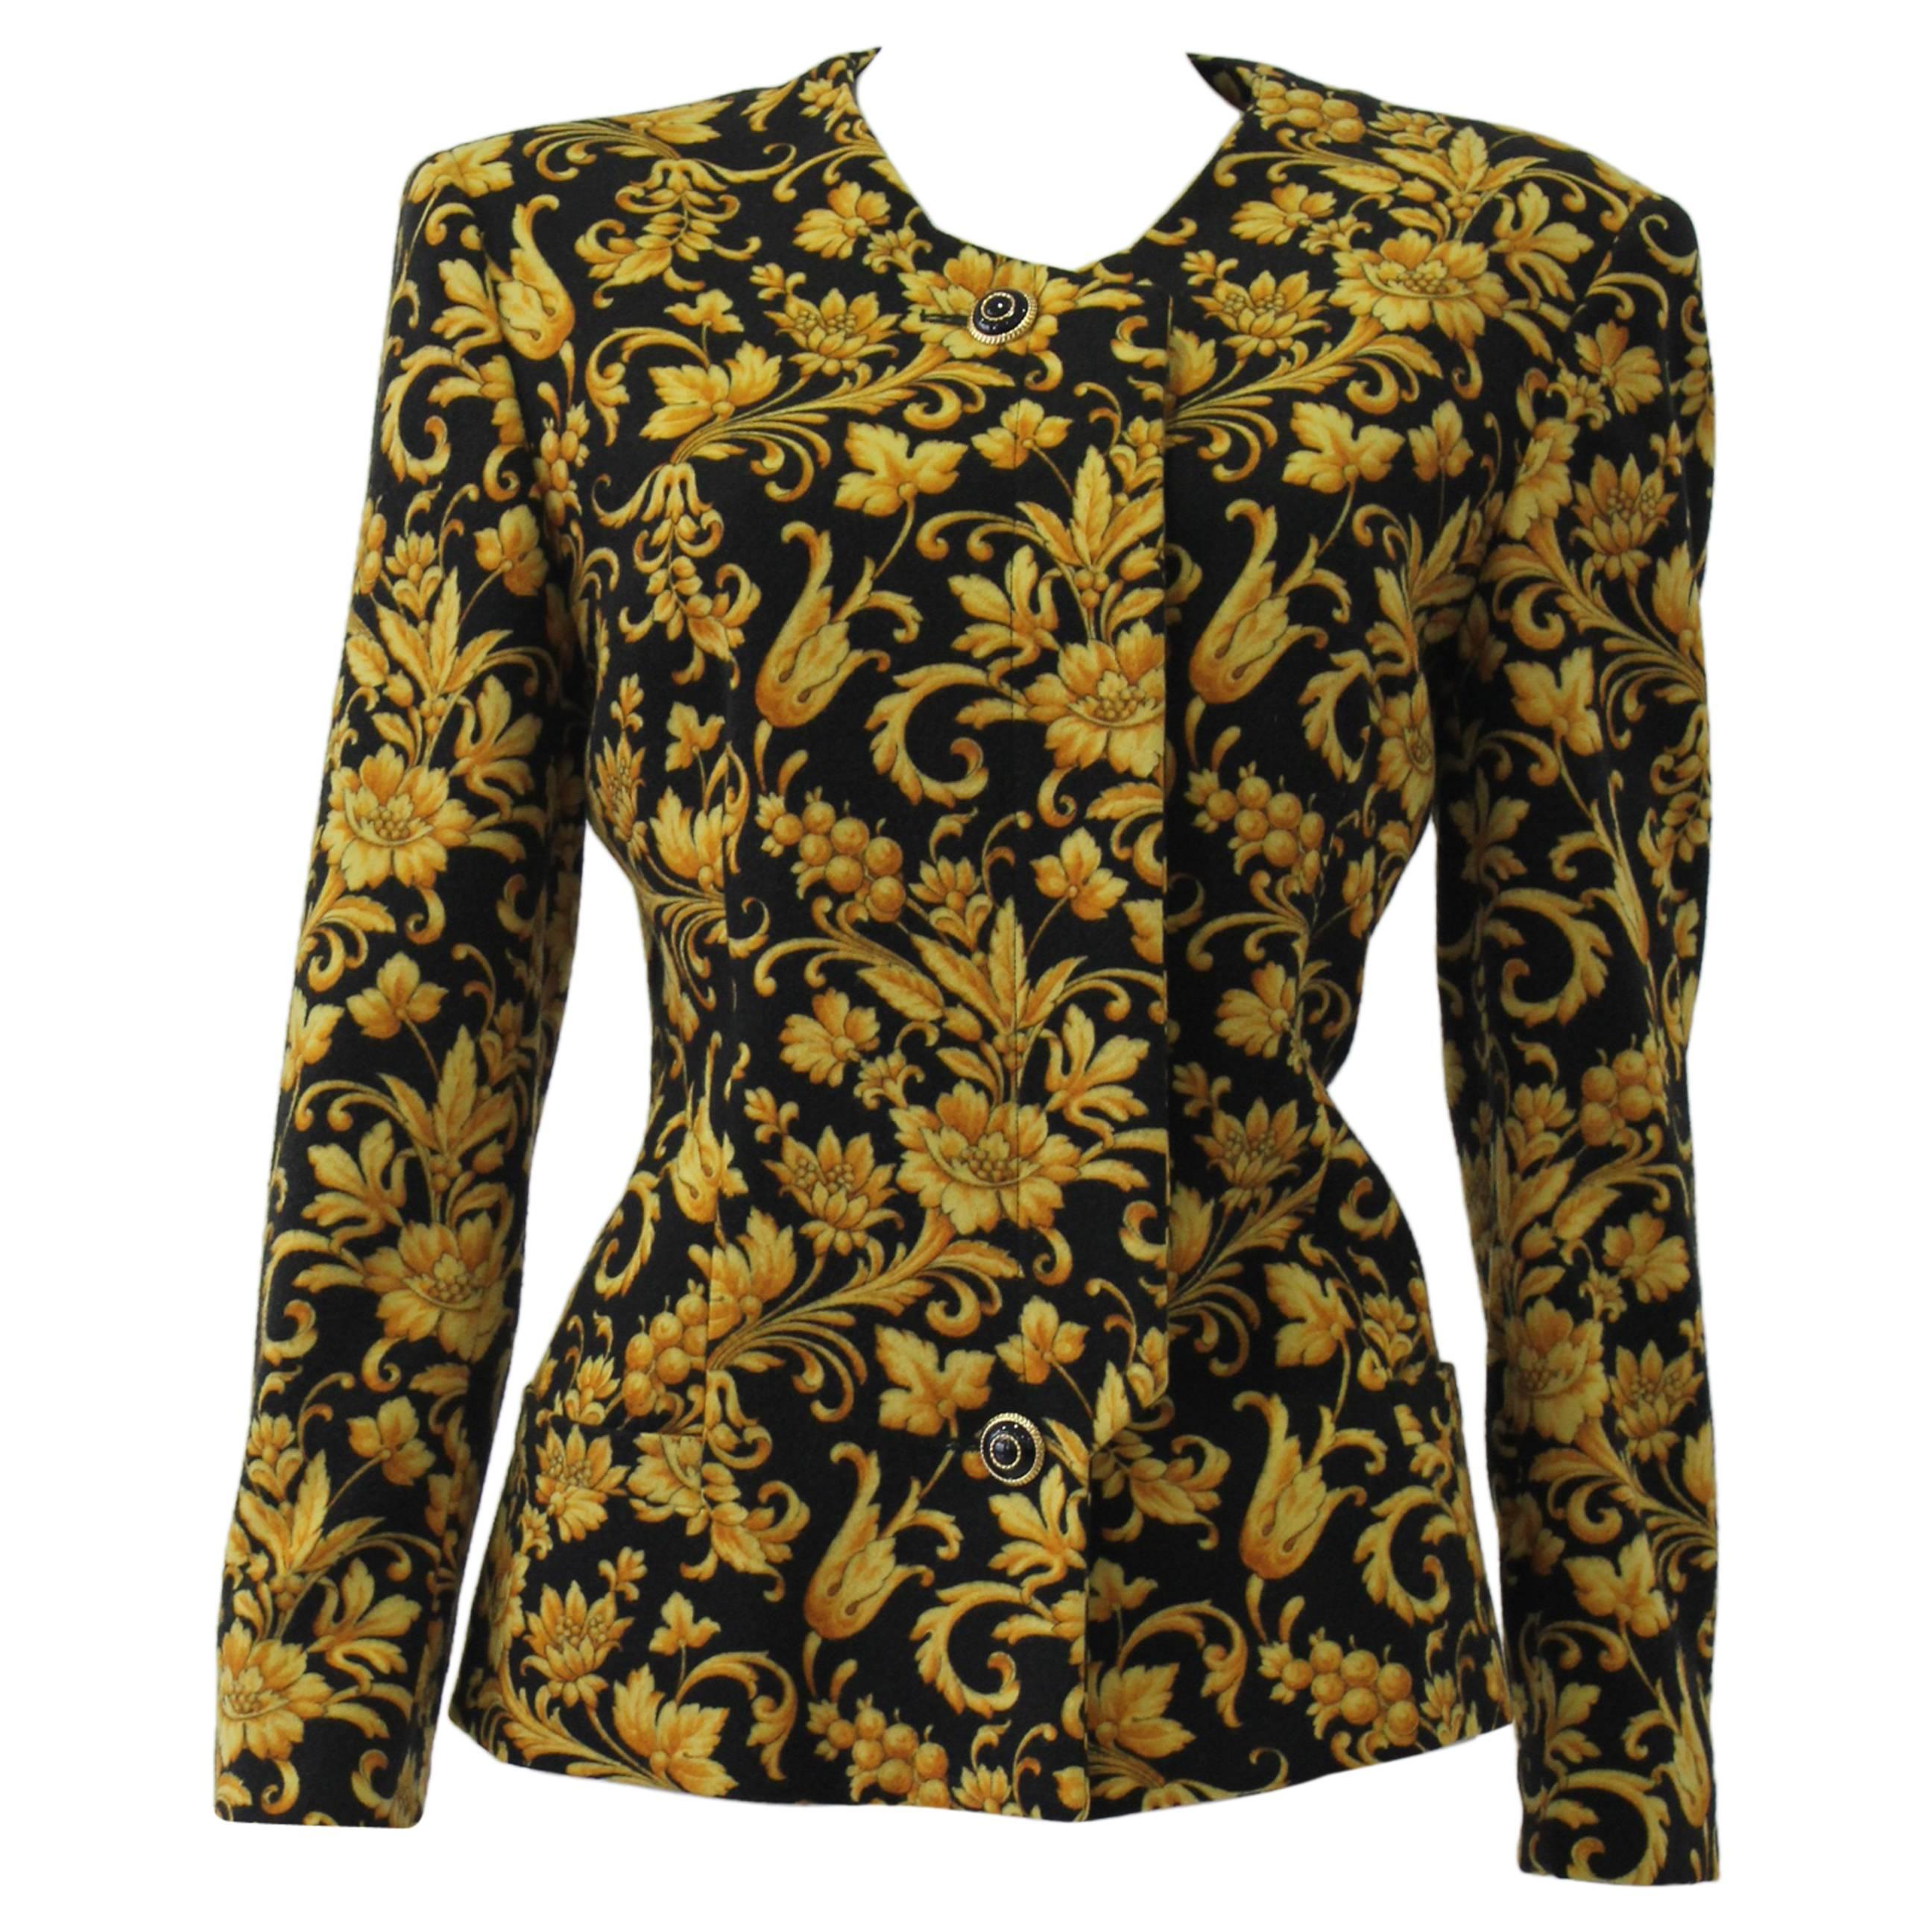 Gianni Versace Baroque Printed Jacket Fall 1991 For Sale